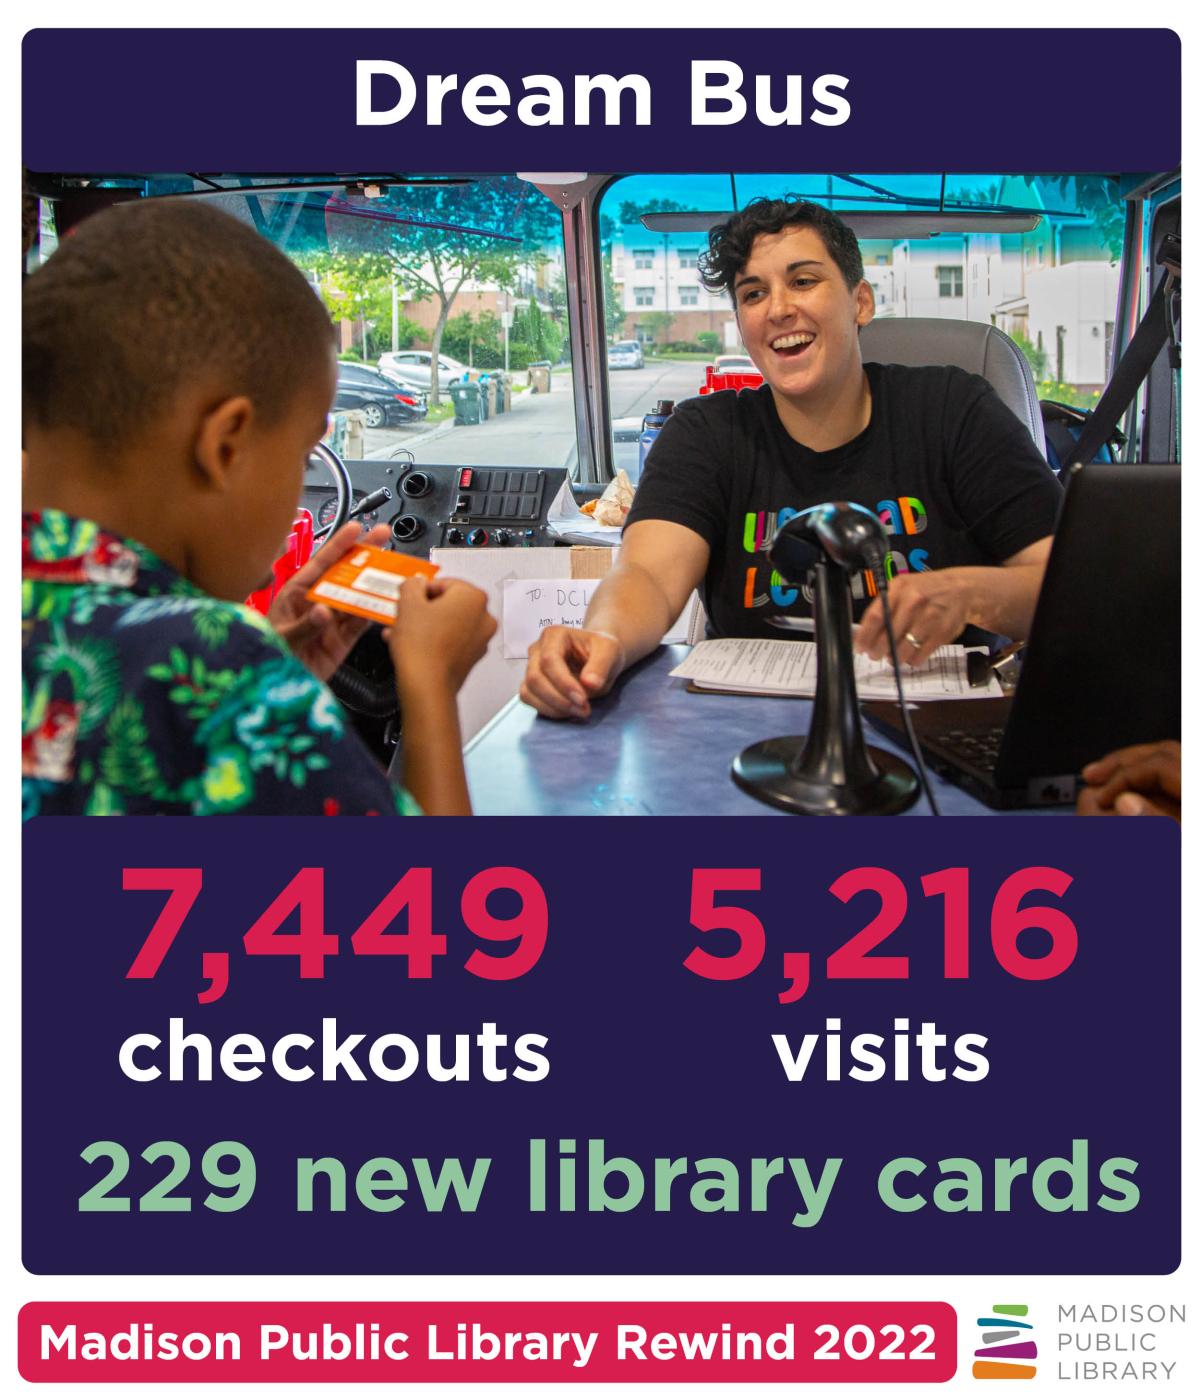 Madison Public Library's Dream Bus performance for 2022